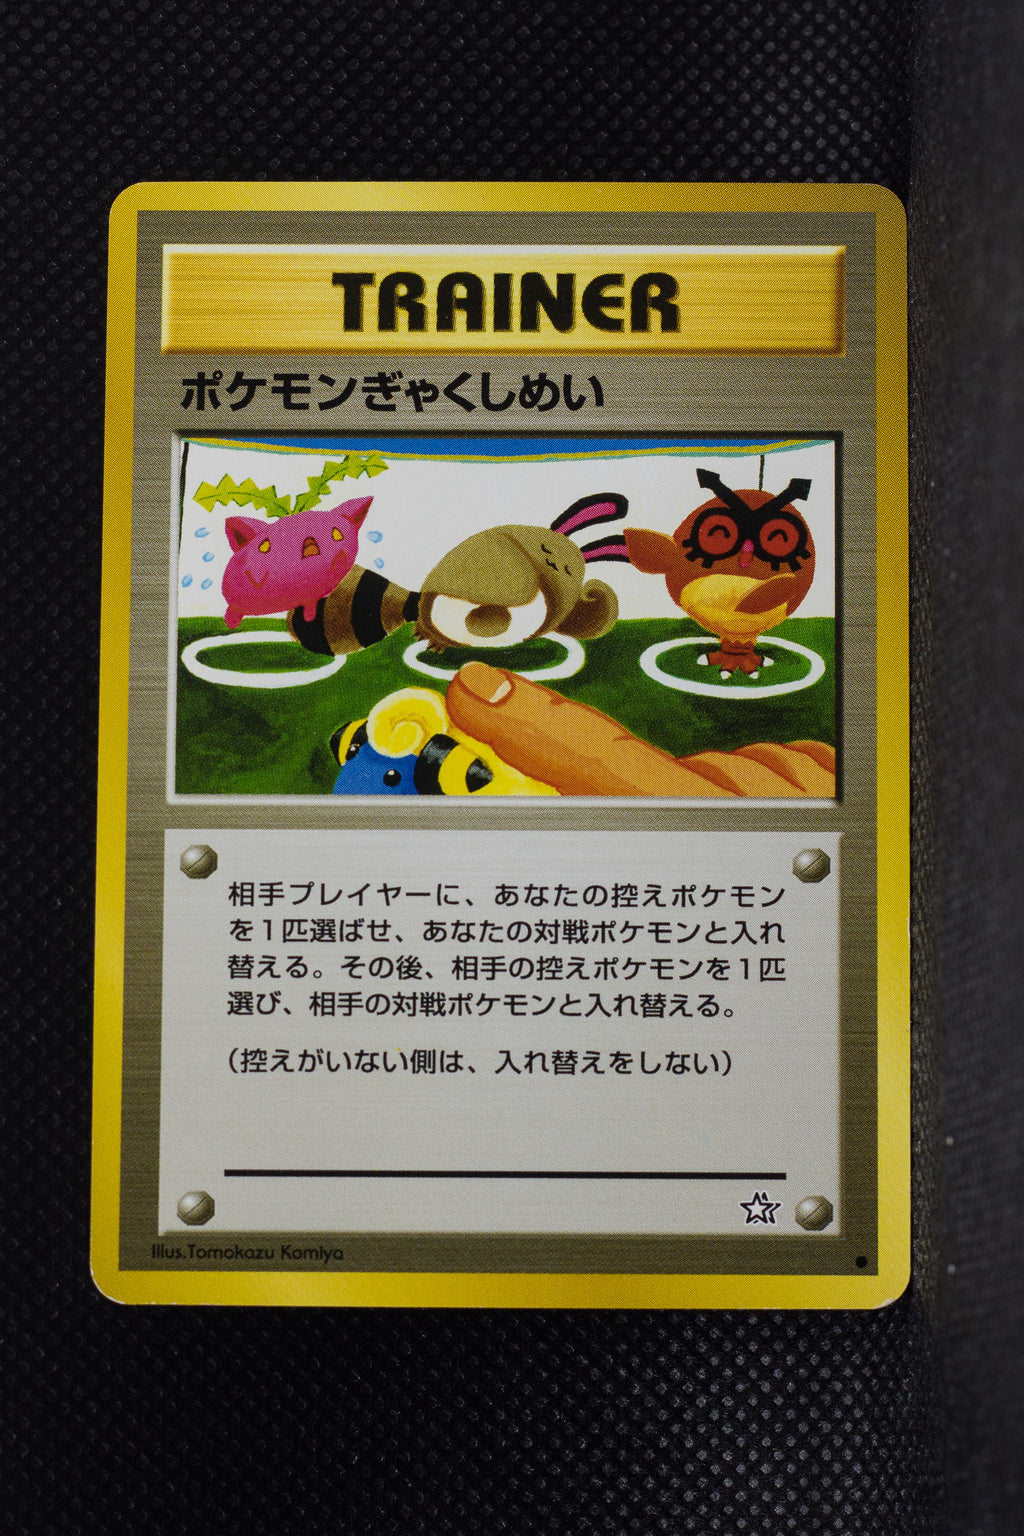 Neo 1 Japanese Trainer Double Gust Common